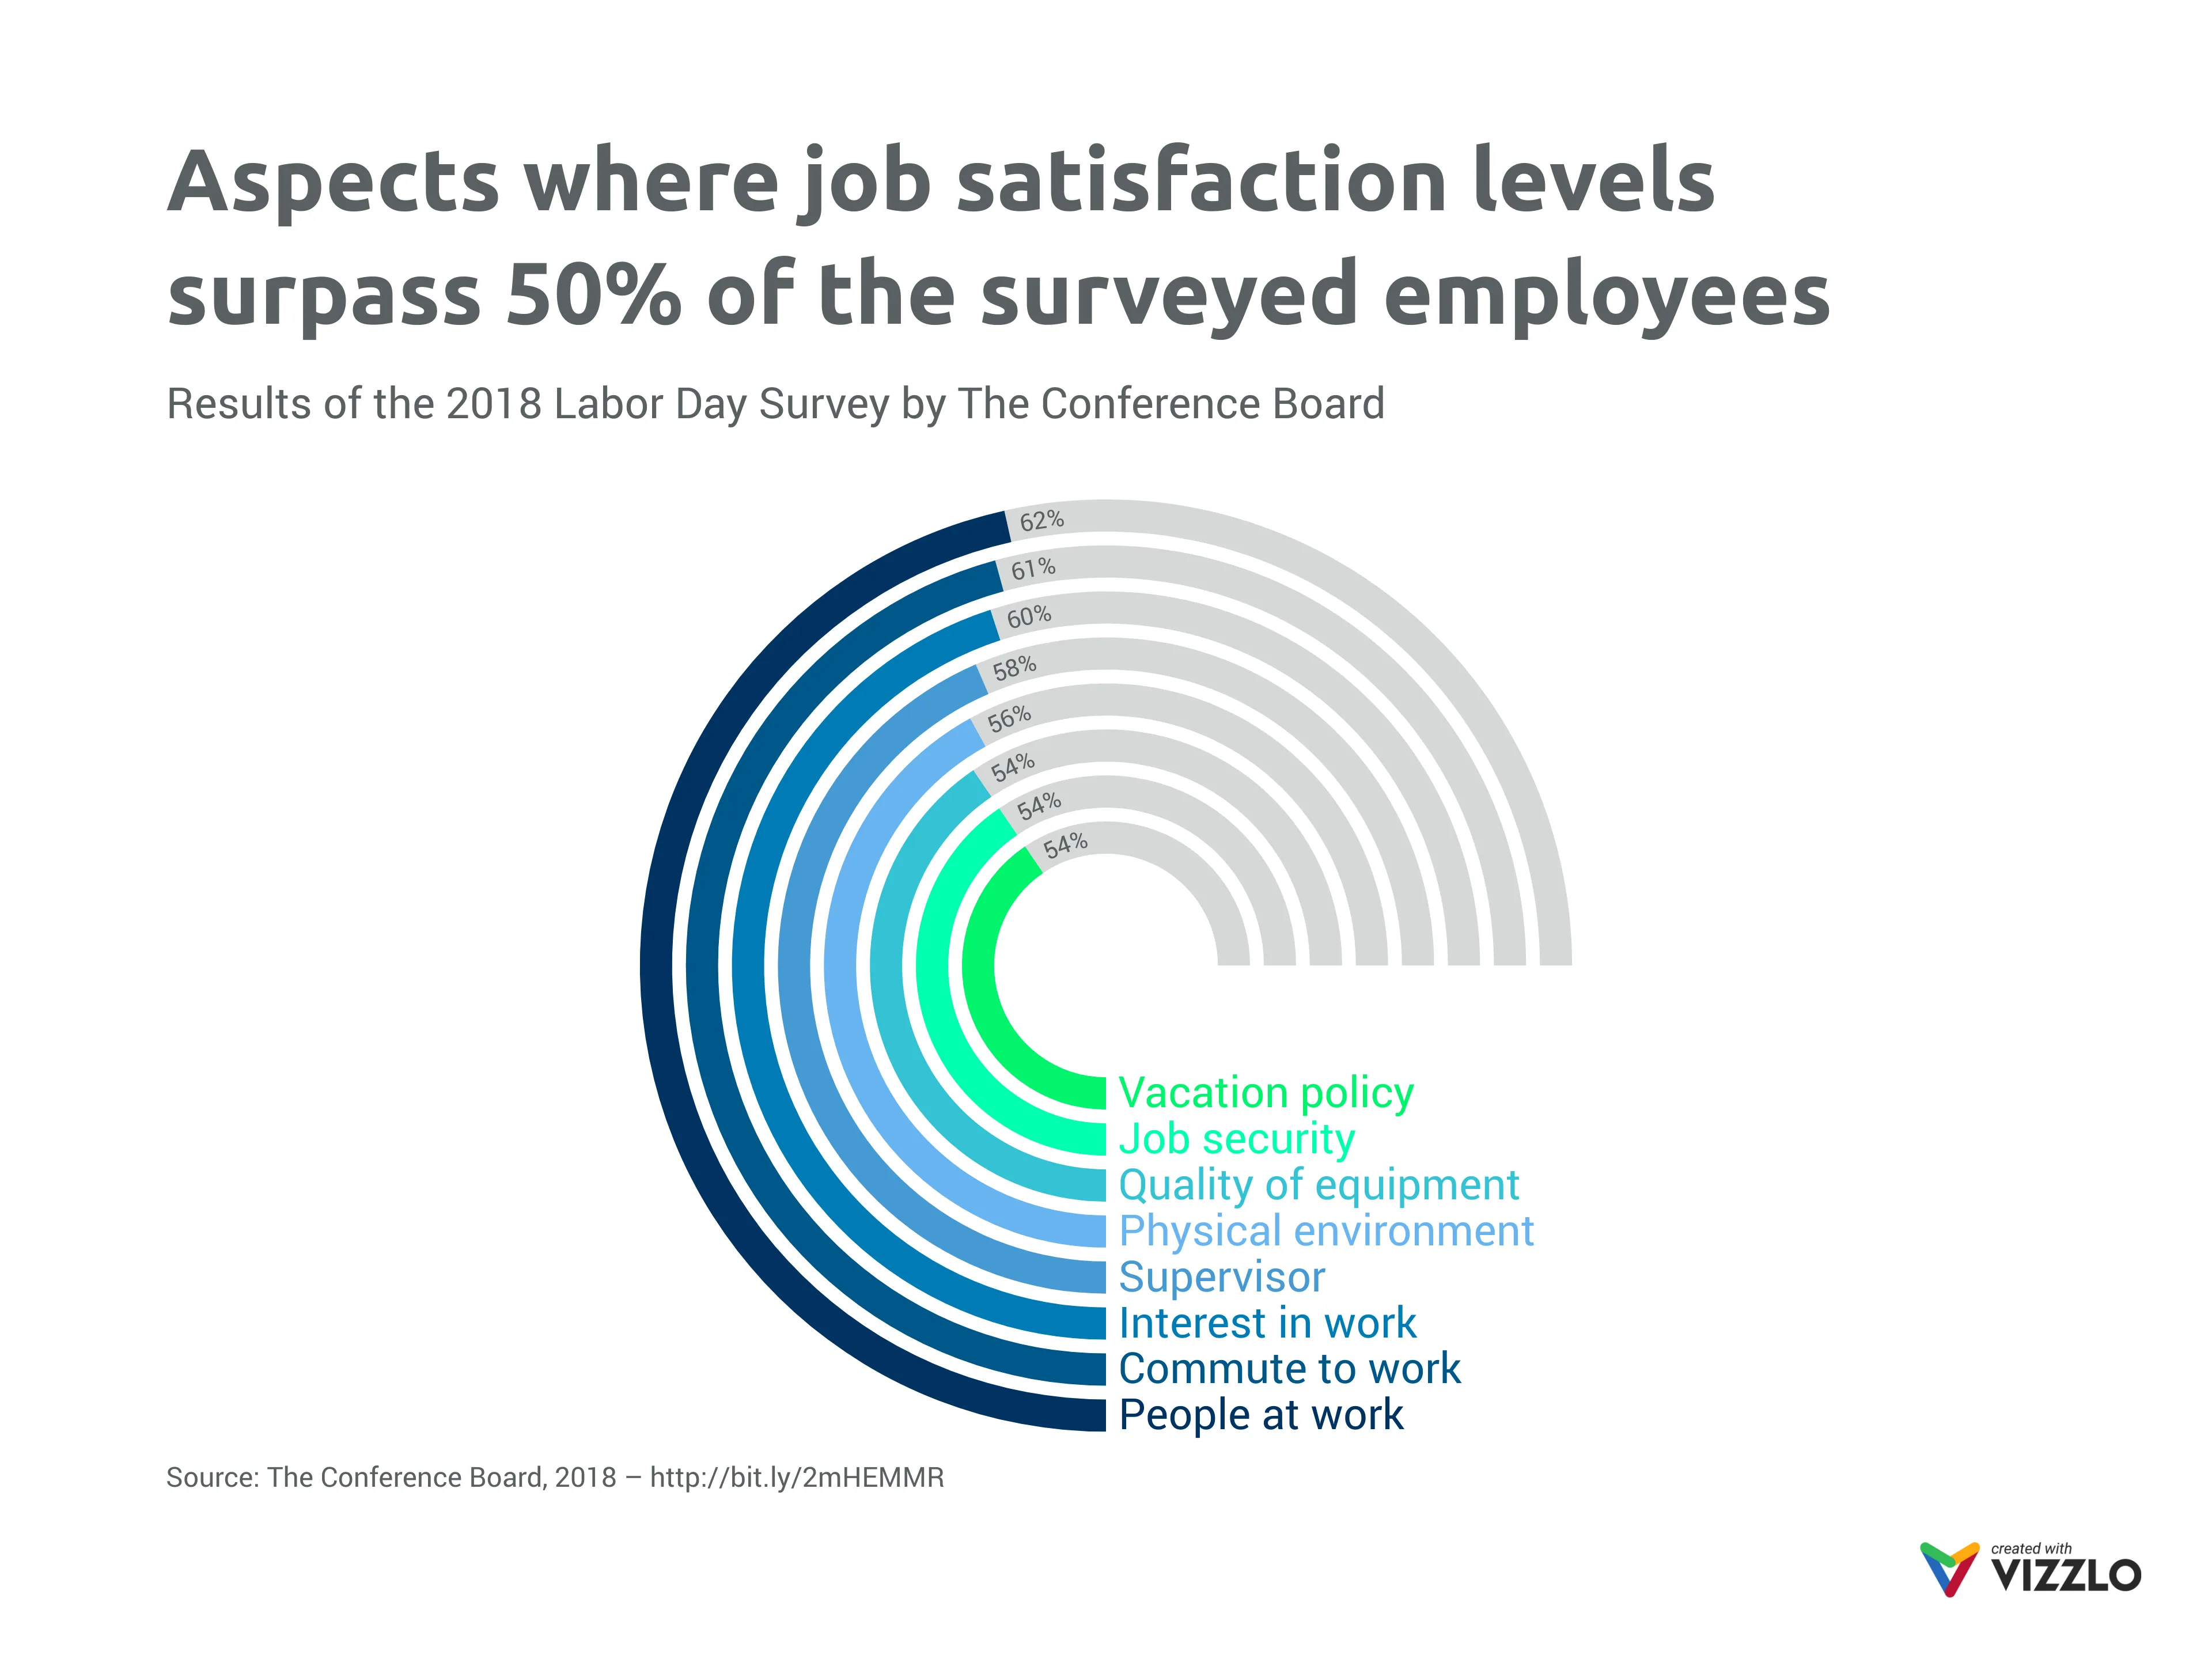 Aspects where job satisfaction levels surpass 50% of the surveyed employees